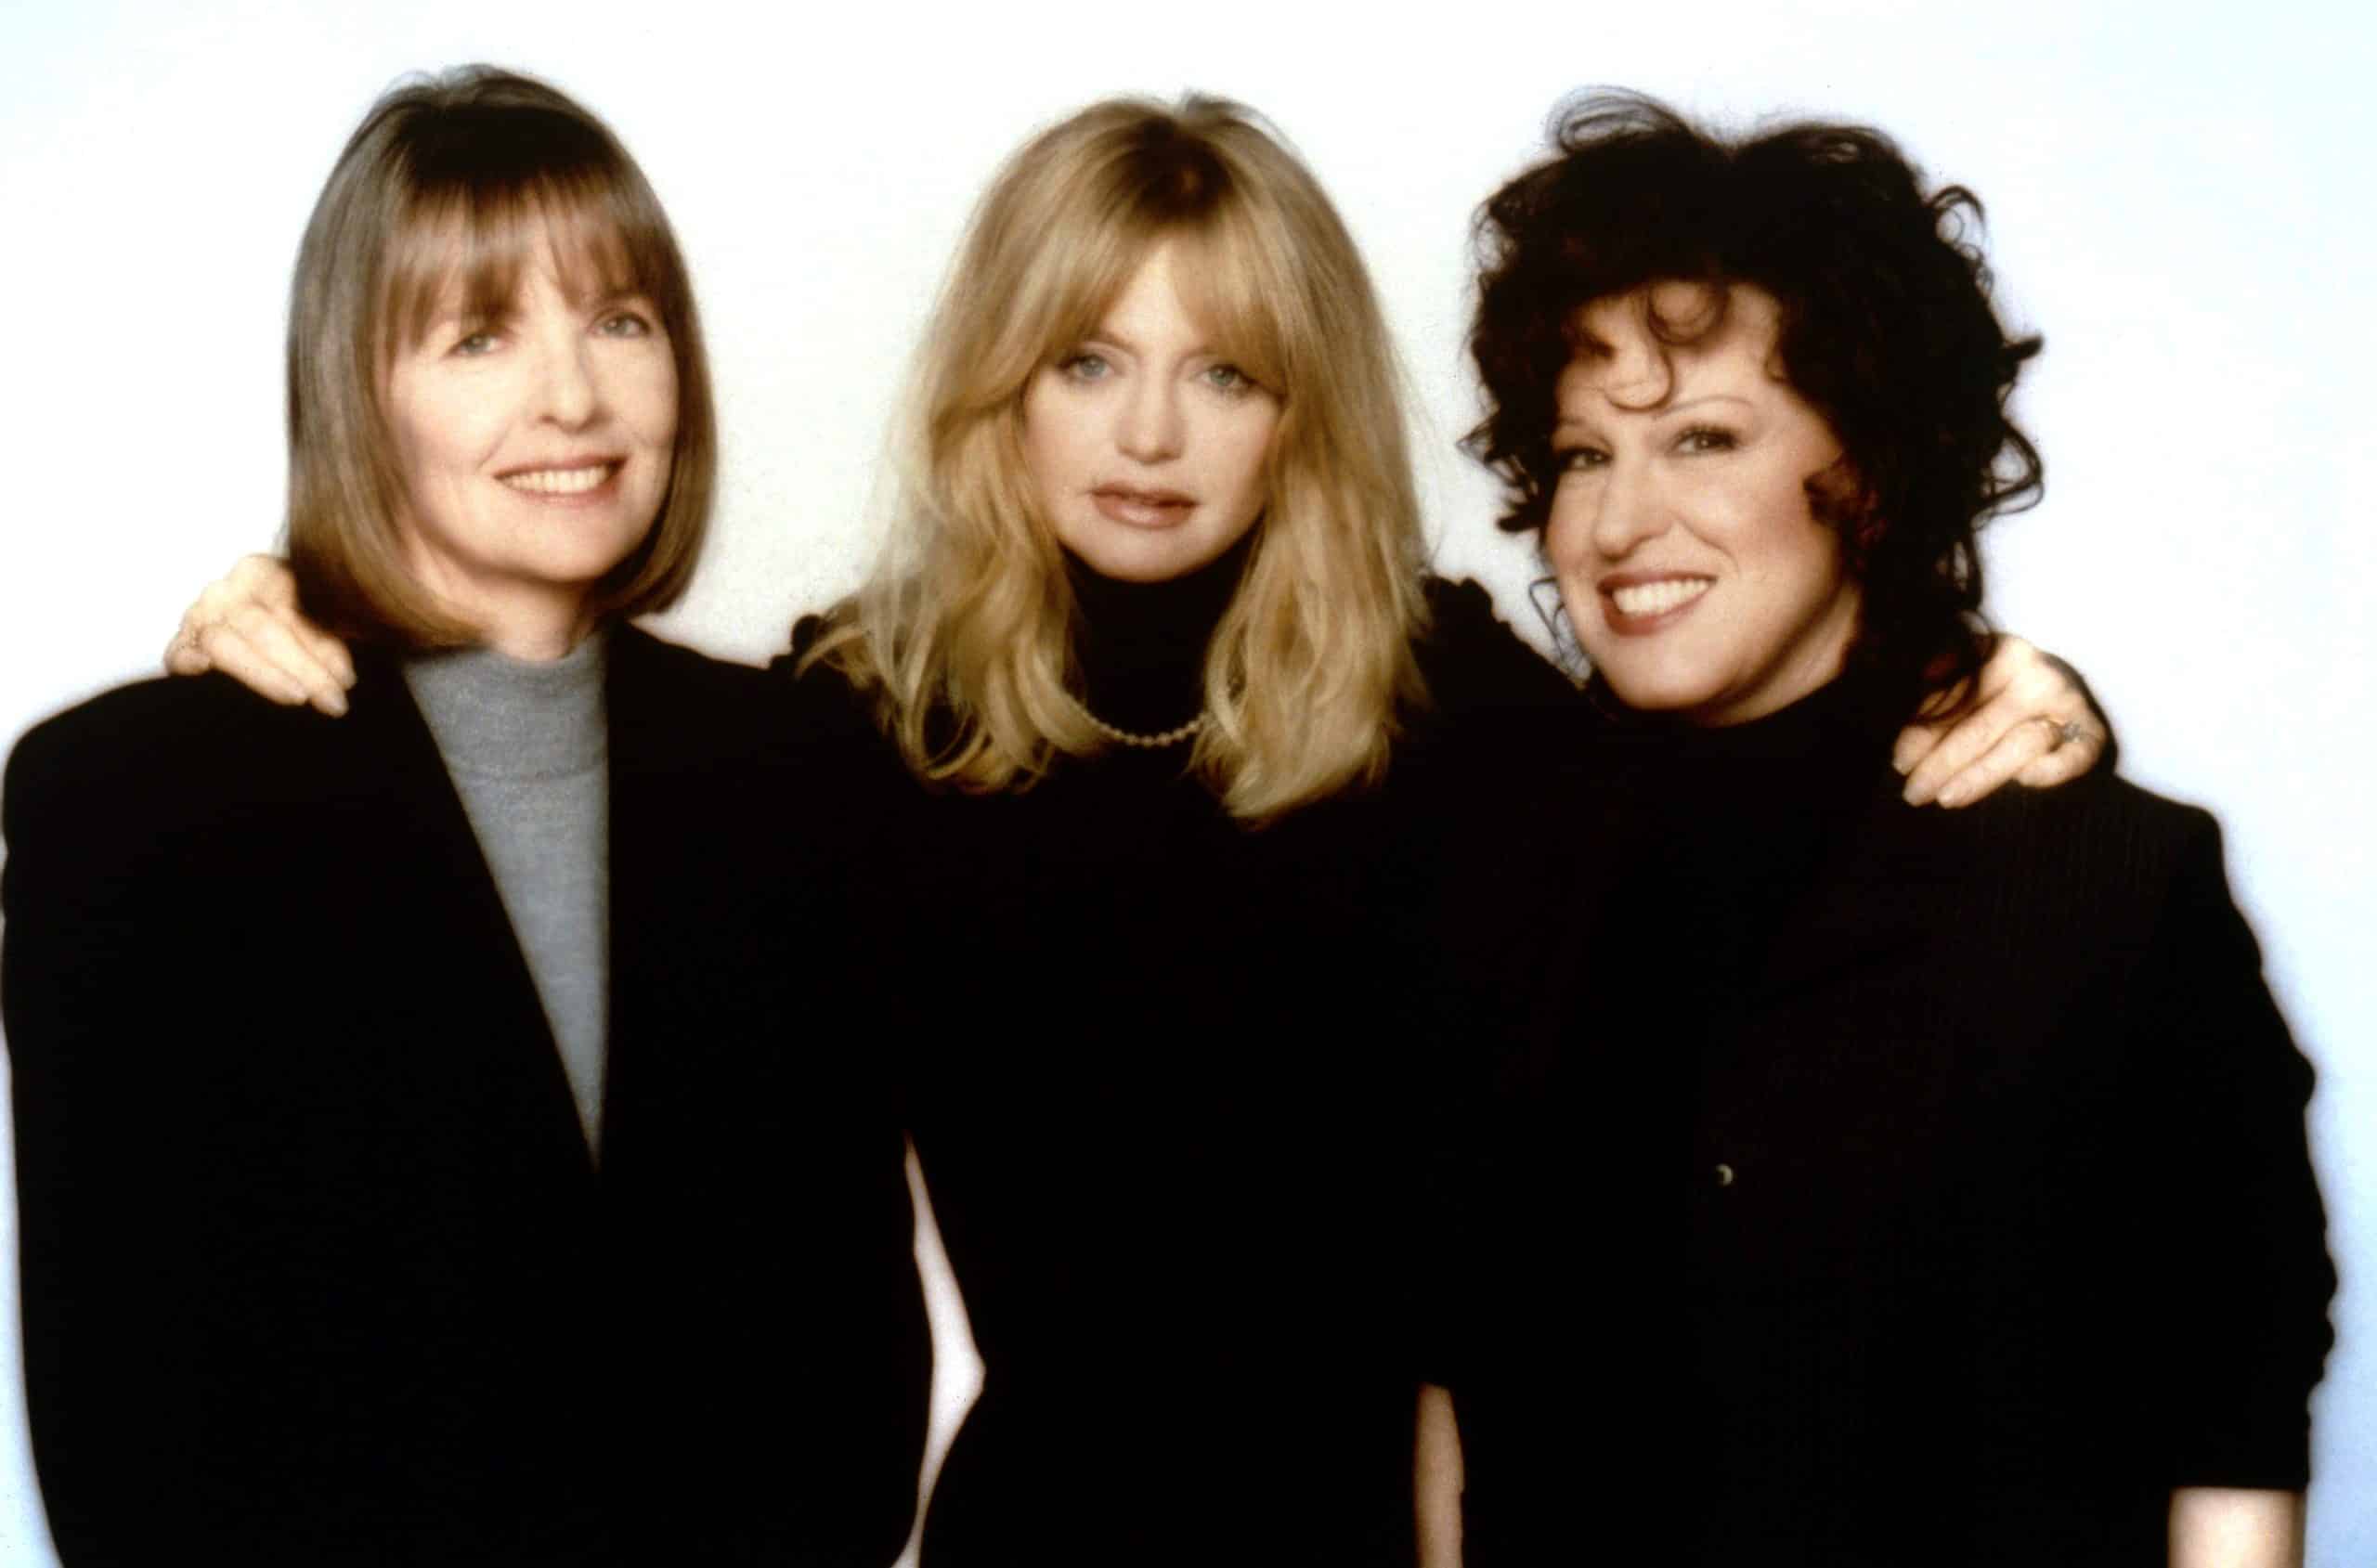 THE FIRST WIVES CLUB, from left, Diane Keaton, Goldie Hawn, Bette Midler, 1996